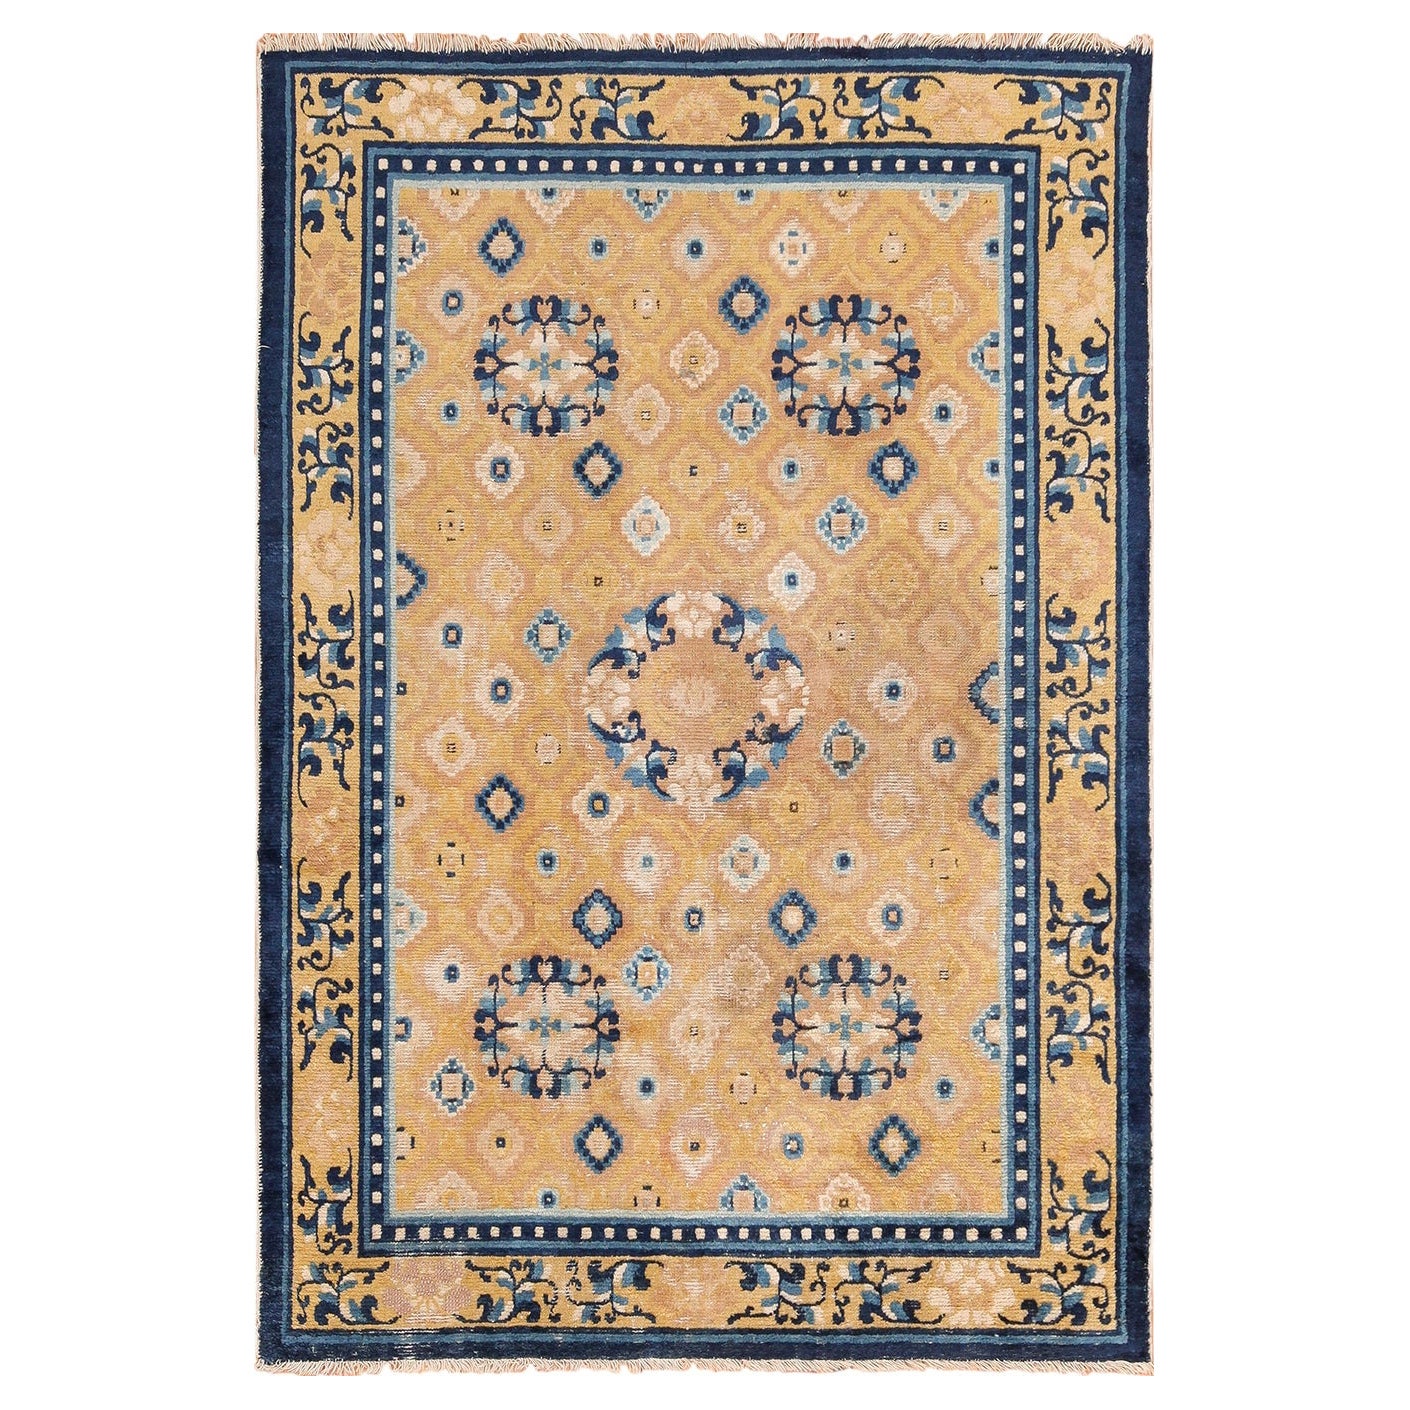 Nazmiyal Collection Mid-19th Century Chinese Ningxia Rug. 4 ft x 6 ft